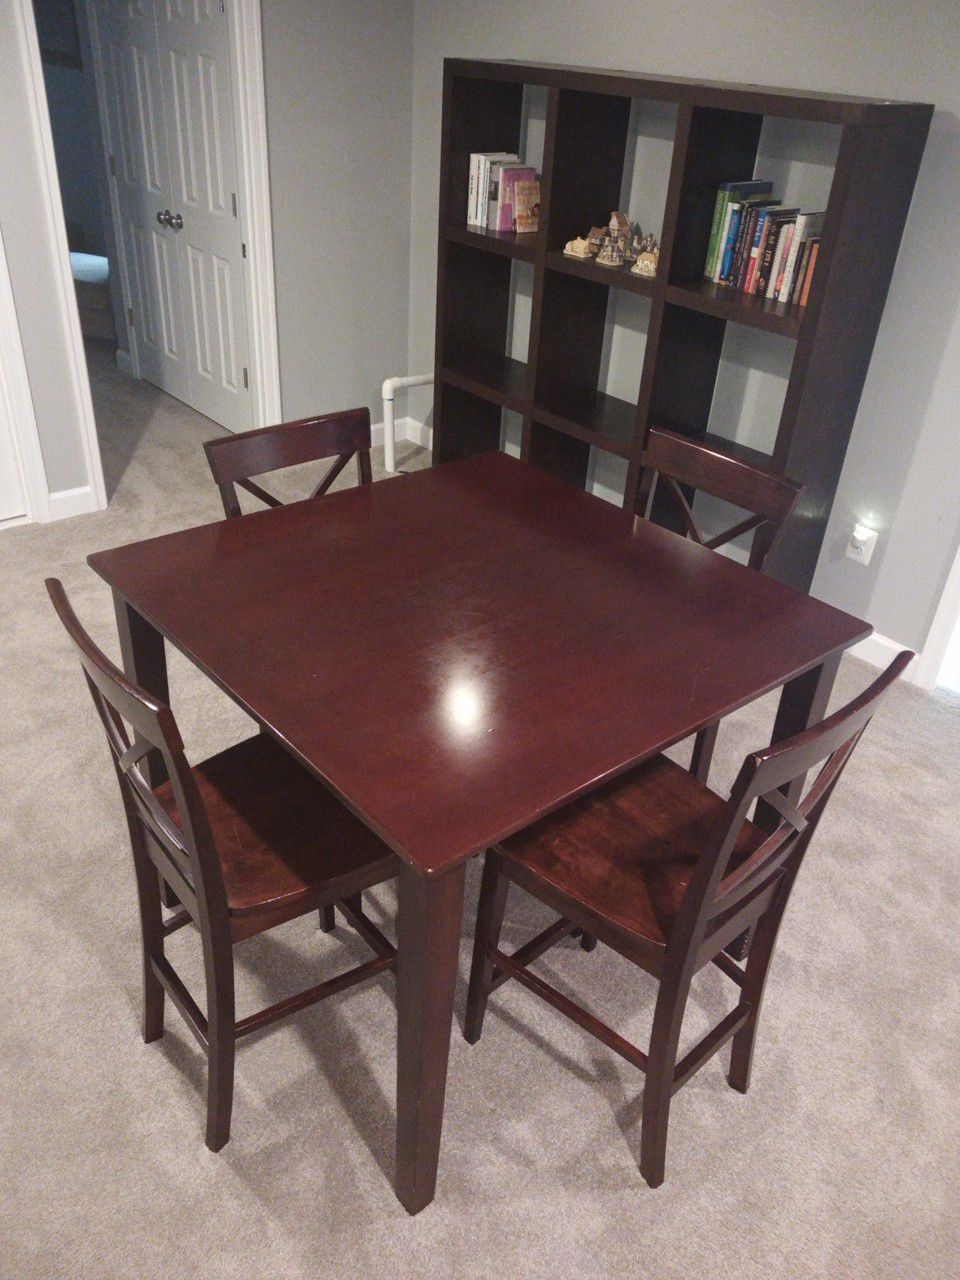 Table with four high chairs